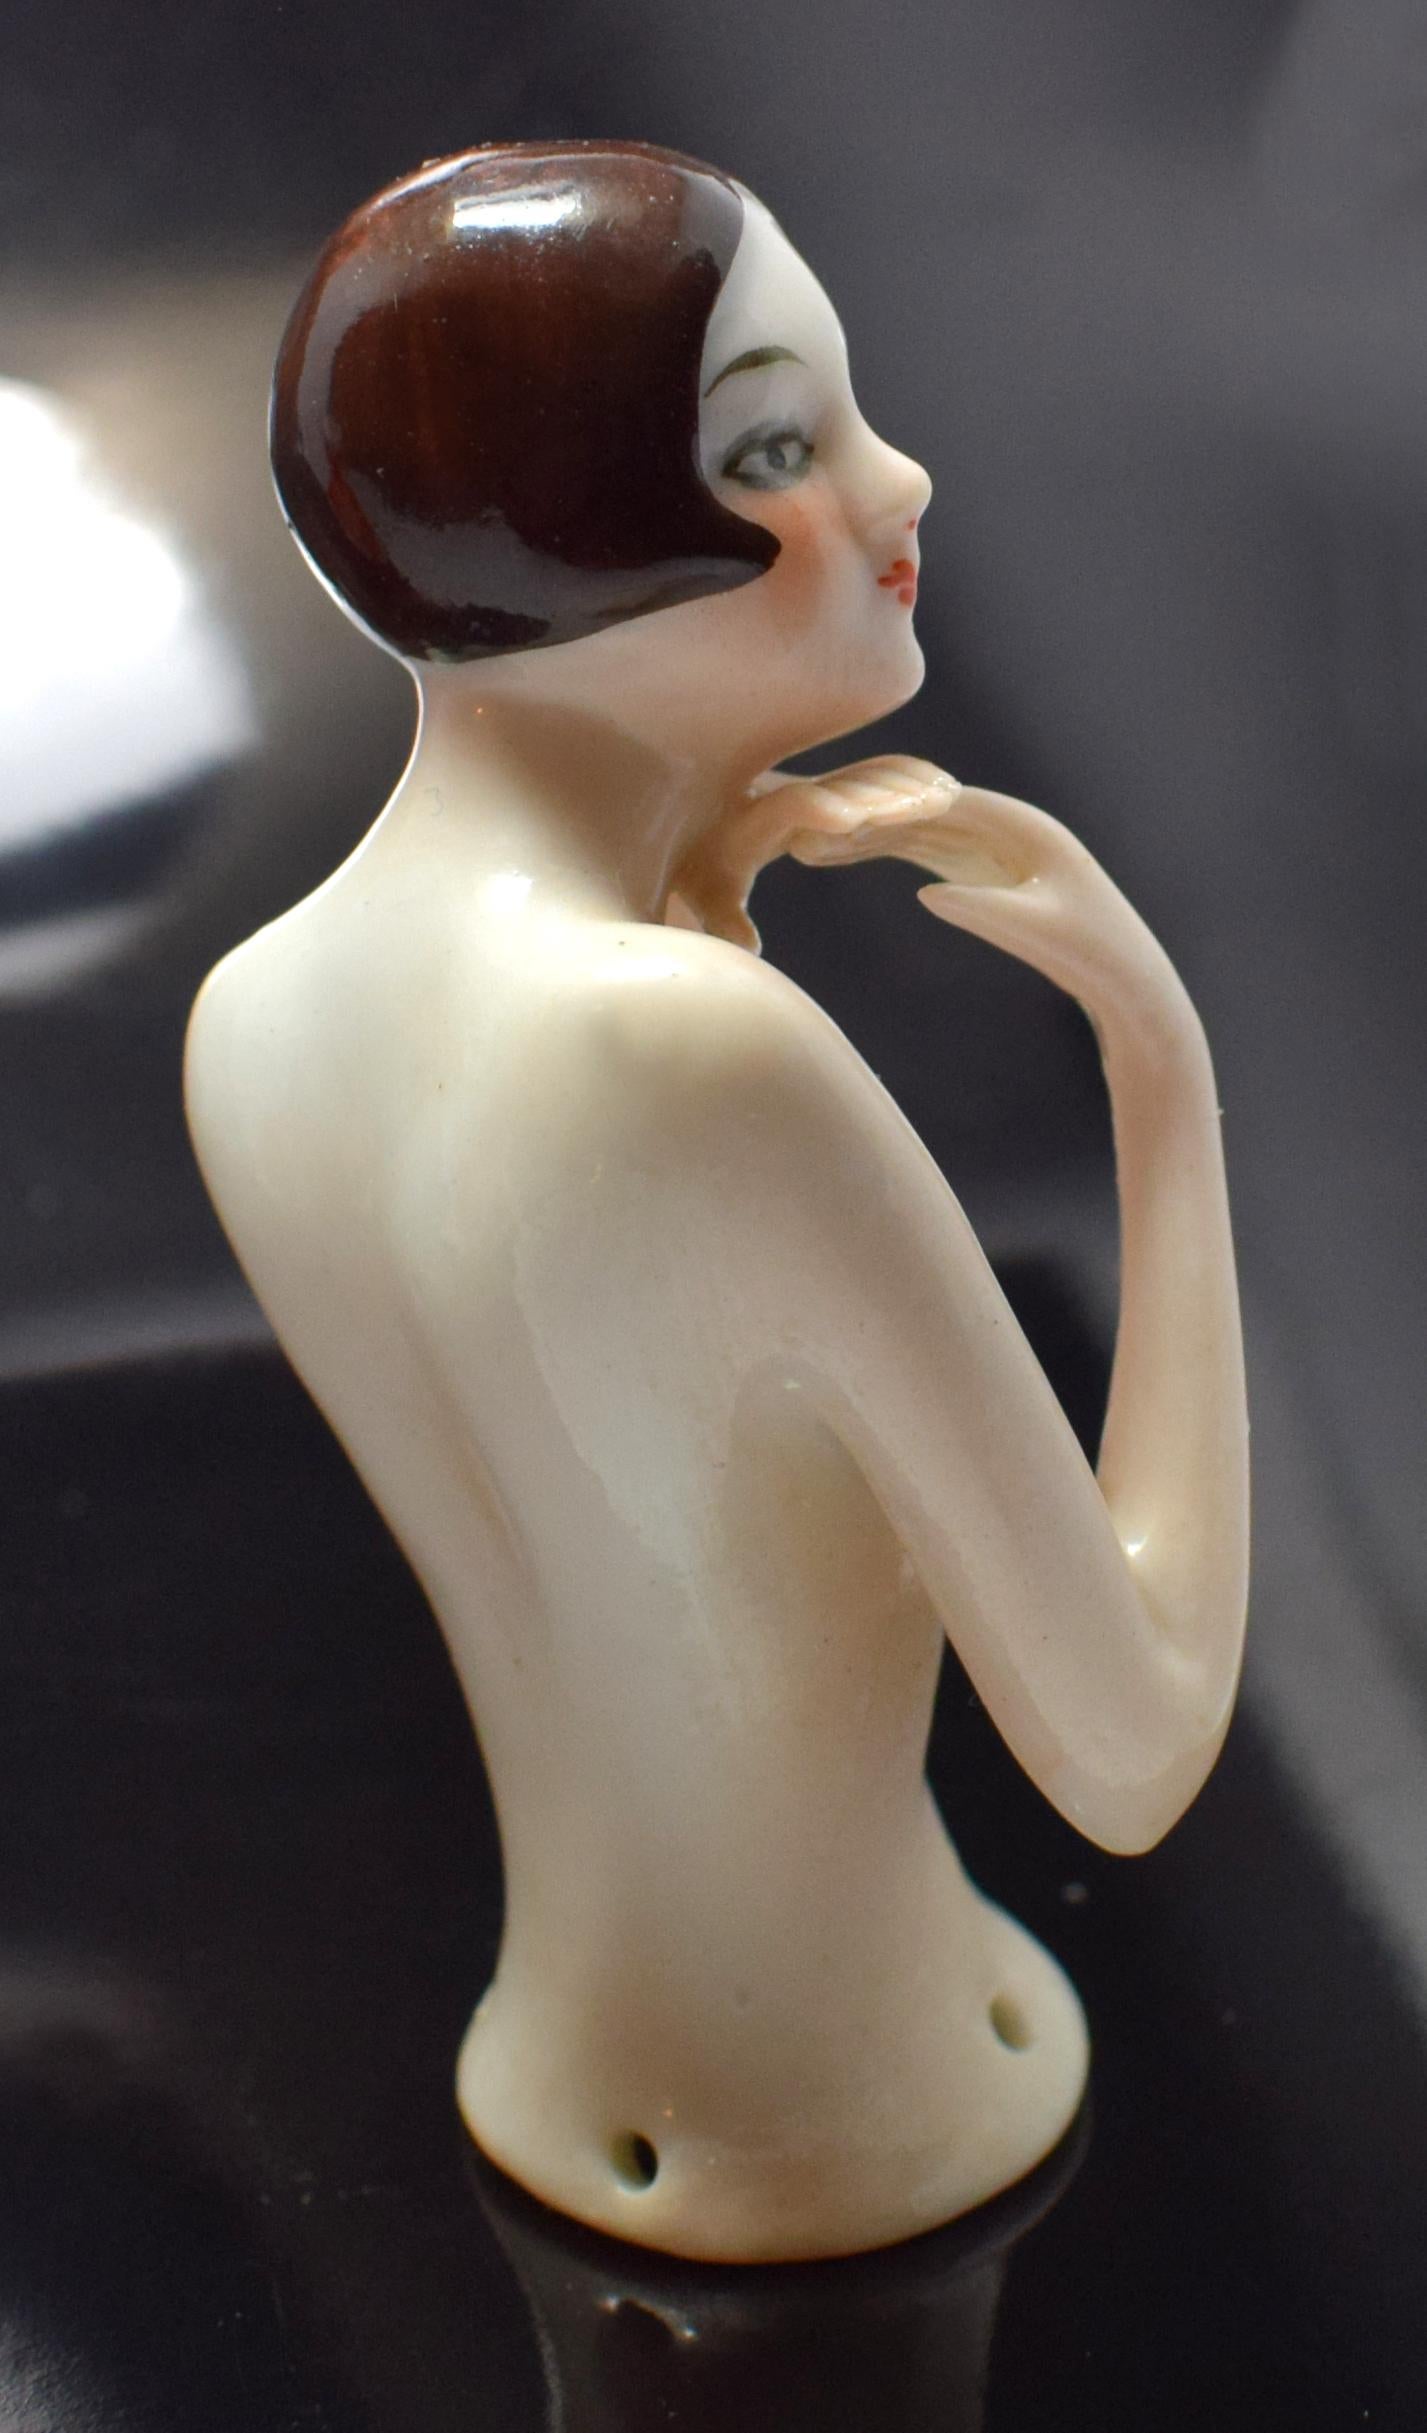 Beautiful Art Deco 1920s pin cushion half doll manufactured by the factory of Carl Schneider. This pin doll is in the form of a nude flapper lady with centre parted glossy dark brown geometric bobbed hair. The doll has long, lean torso with slim